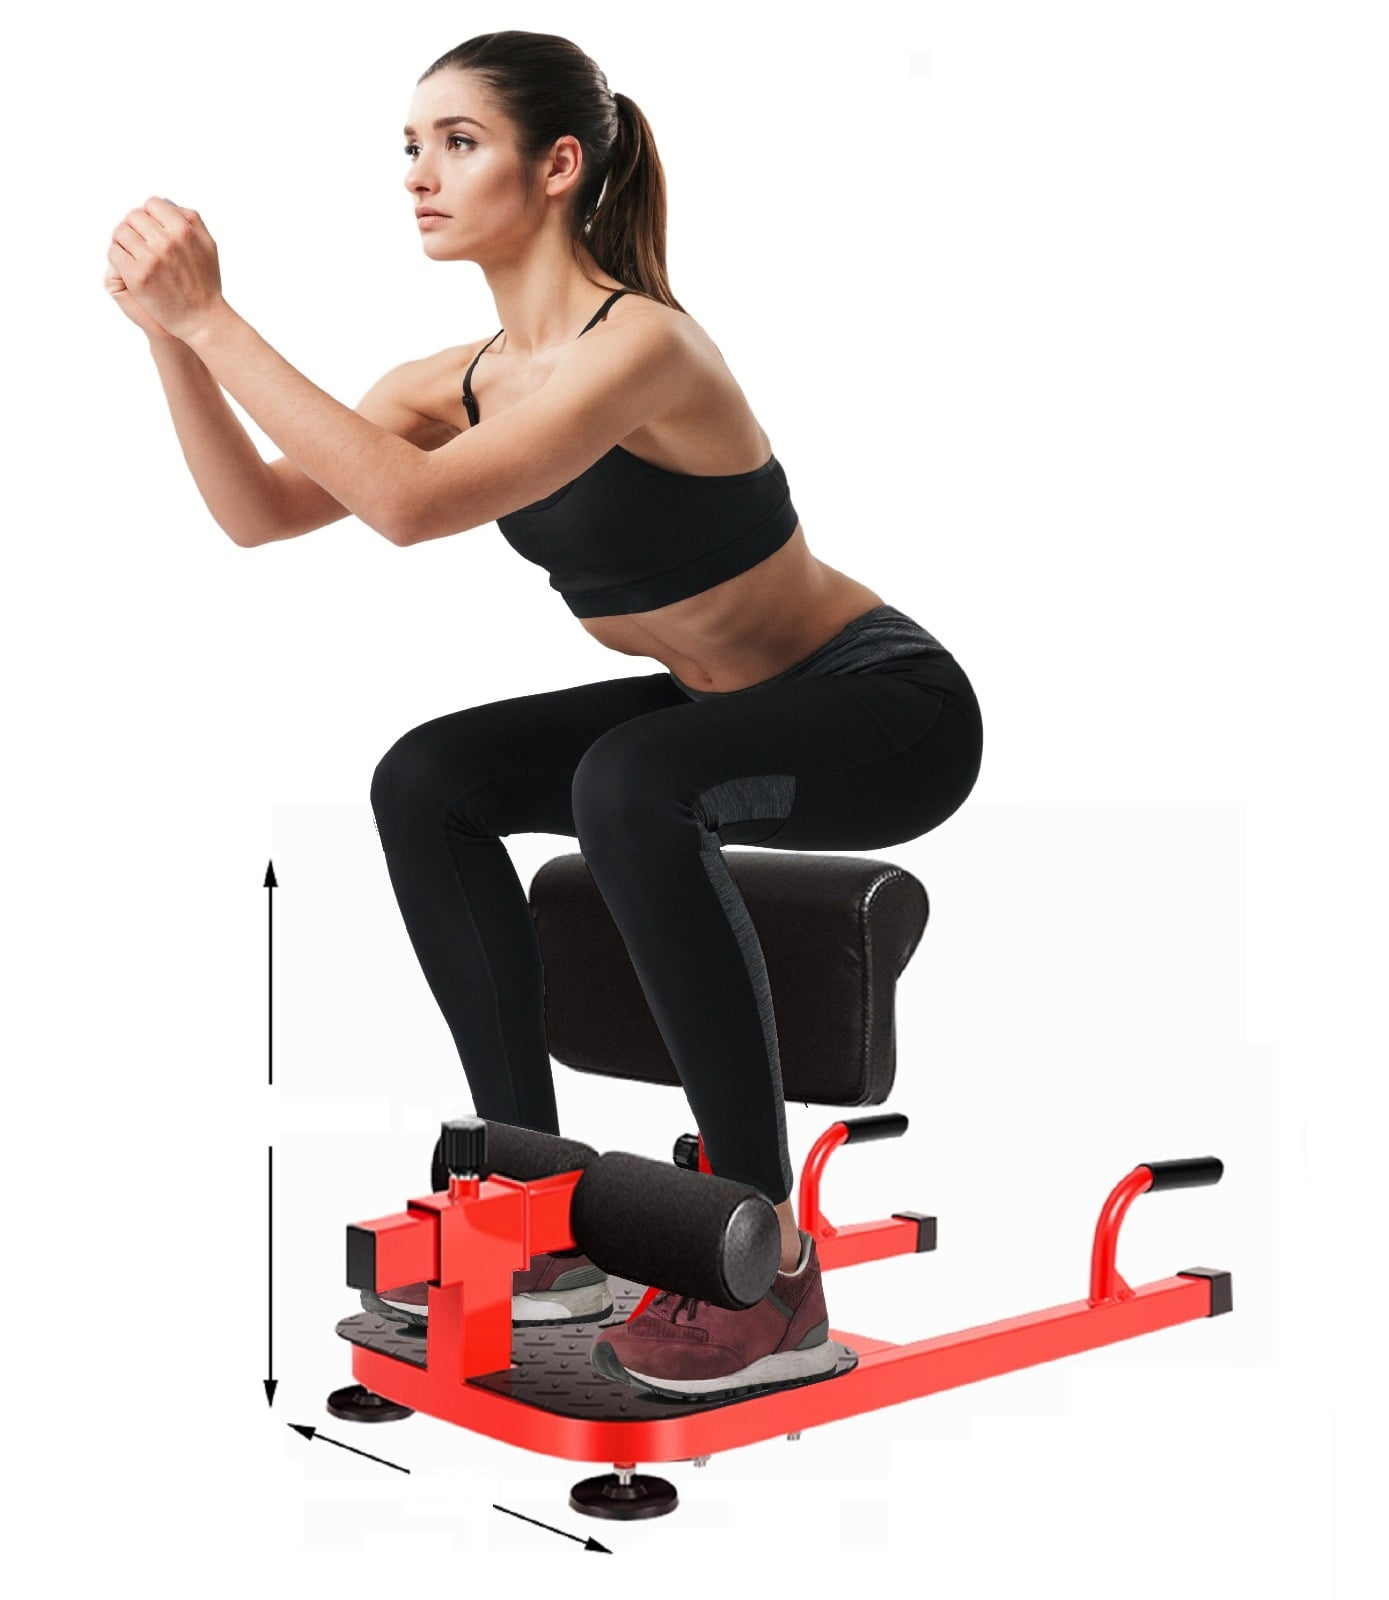 Sissy Squat Maschine Fitness Training Gerät Workout Enow 3in1 Sport Multi 